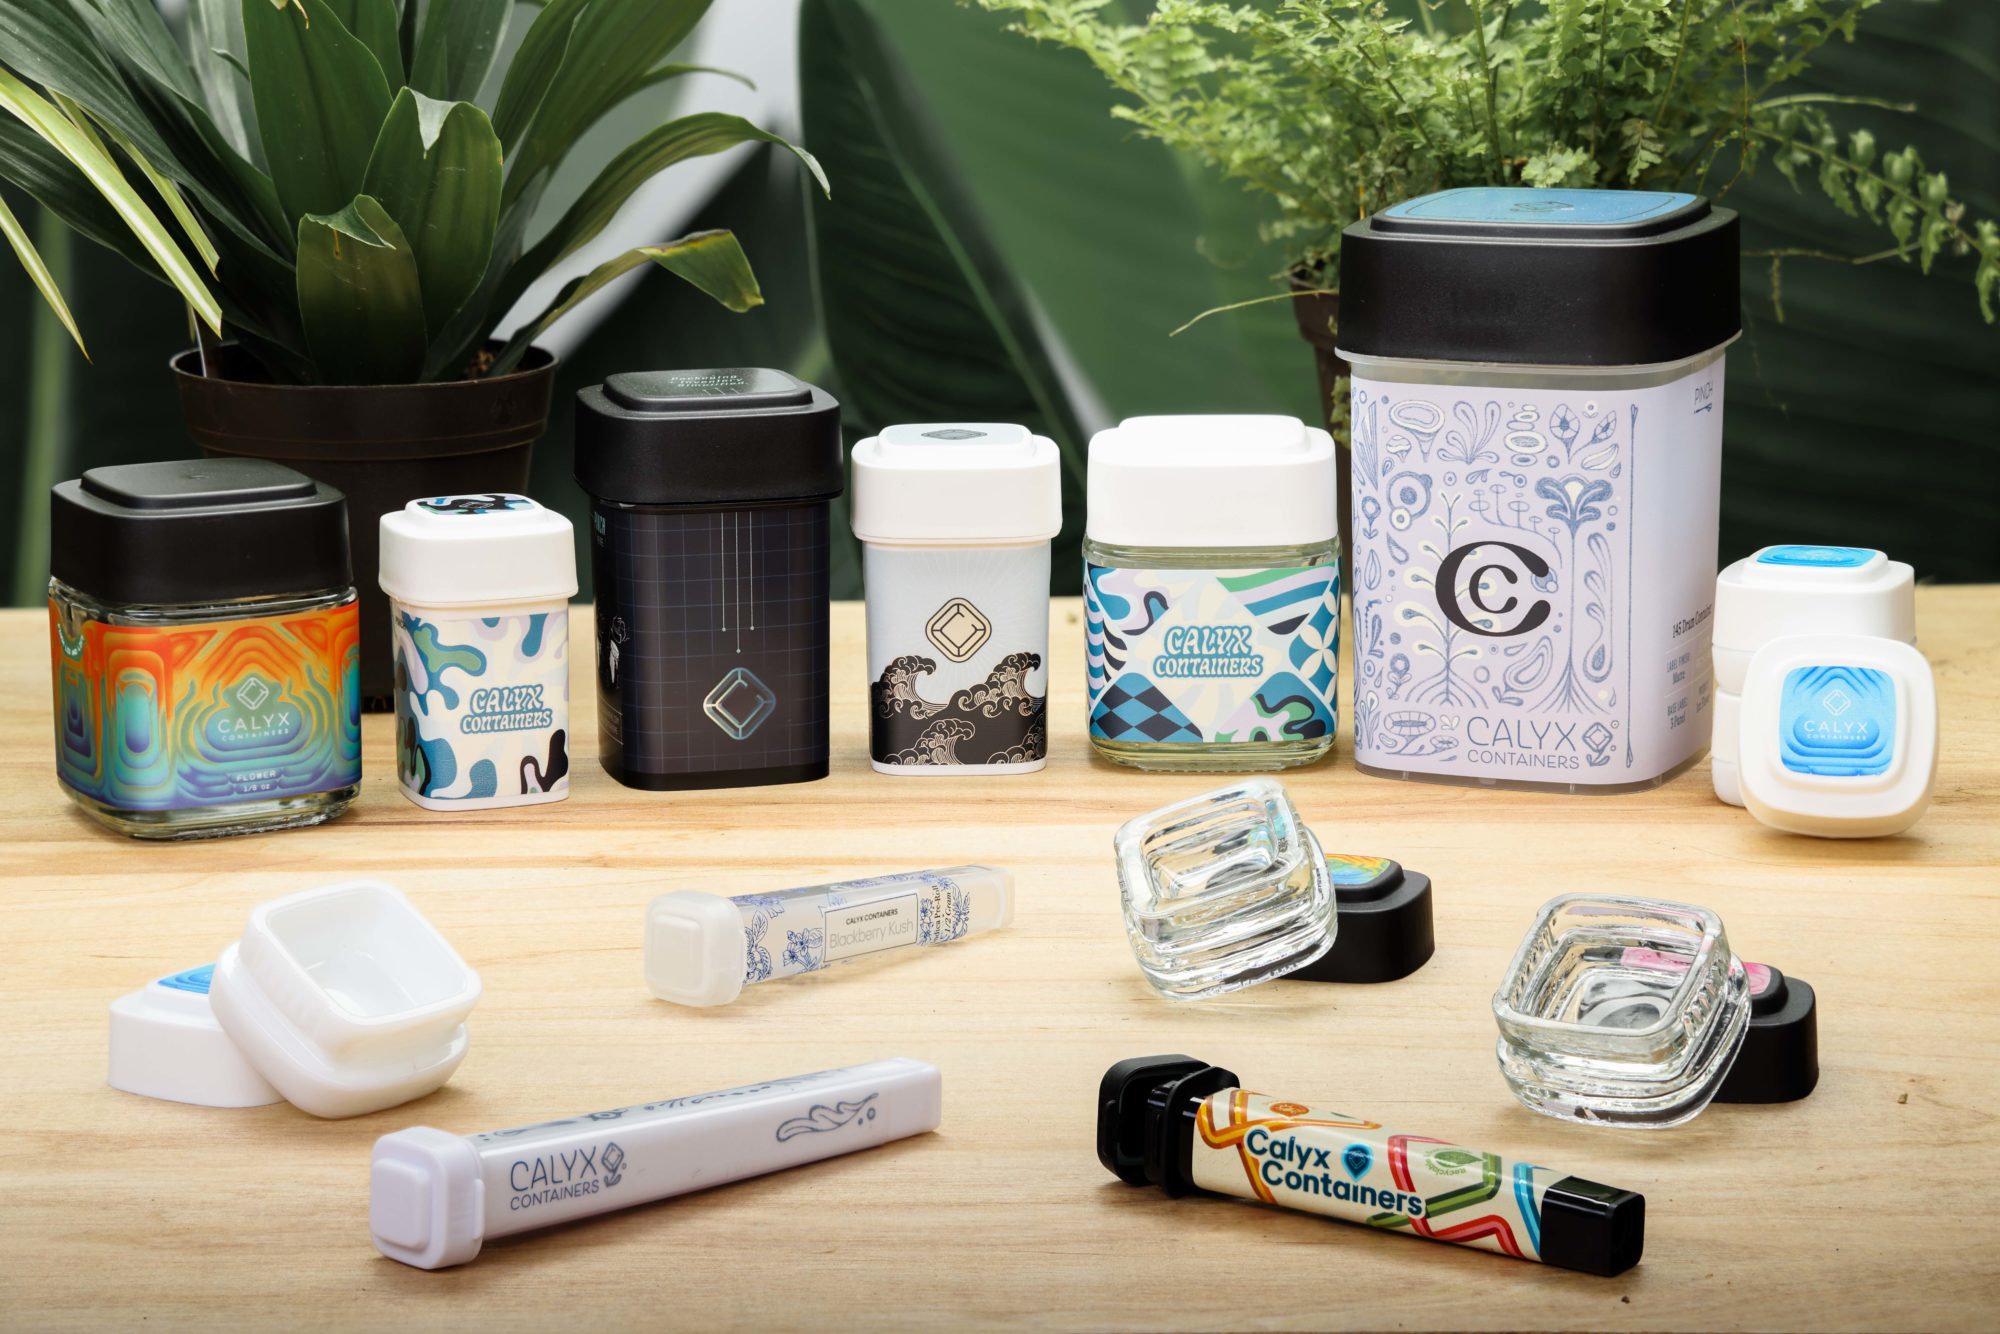 Collection of Calyx Products with customer designs, including the Calyx Jar, Concentrate Containers, Tubes, & Flower Containers